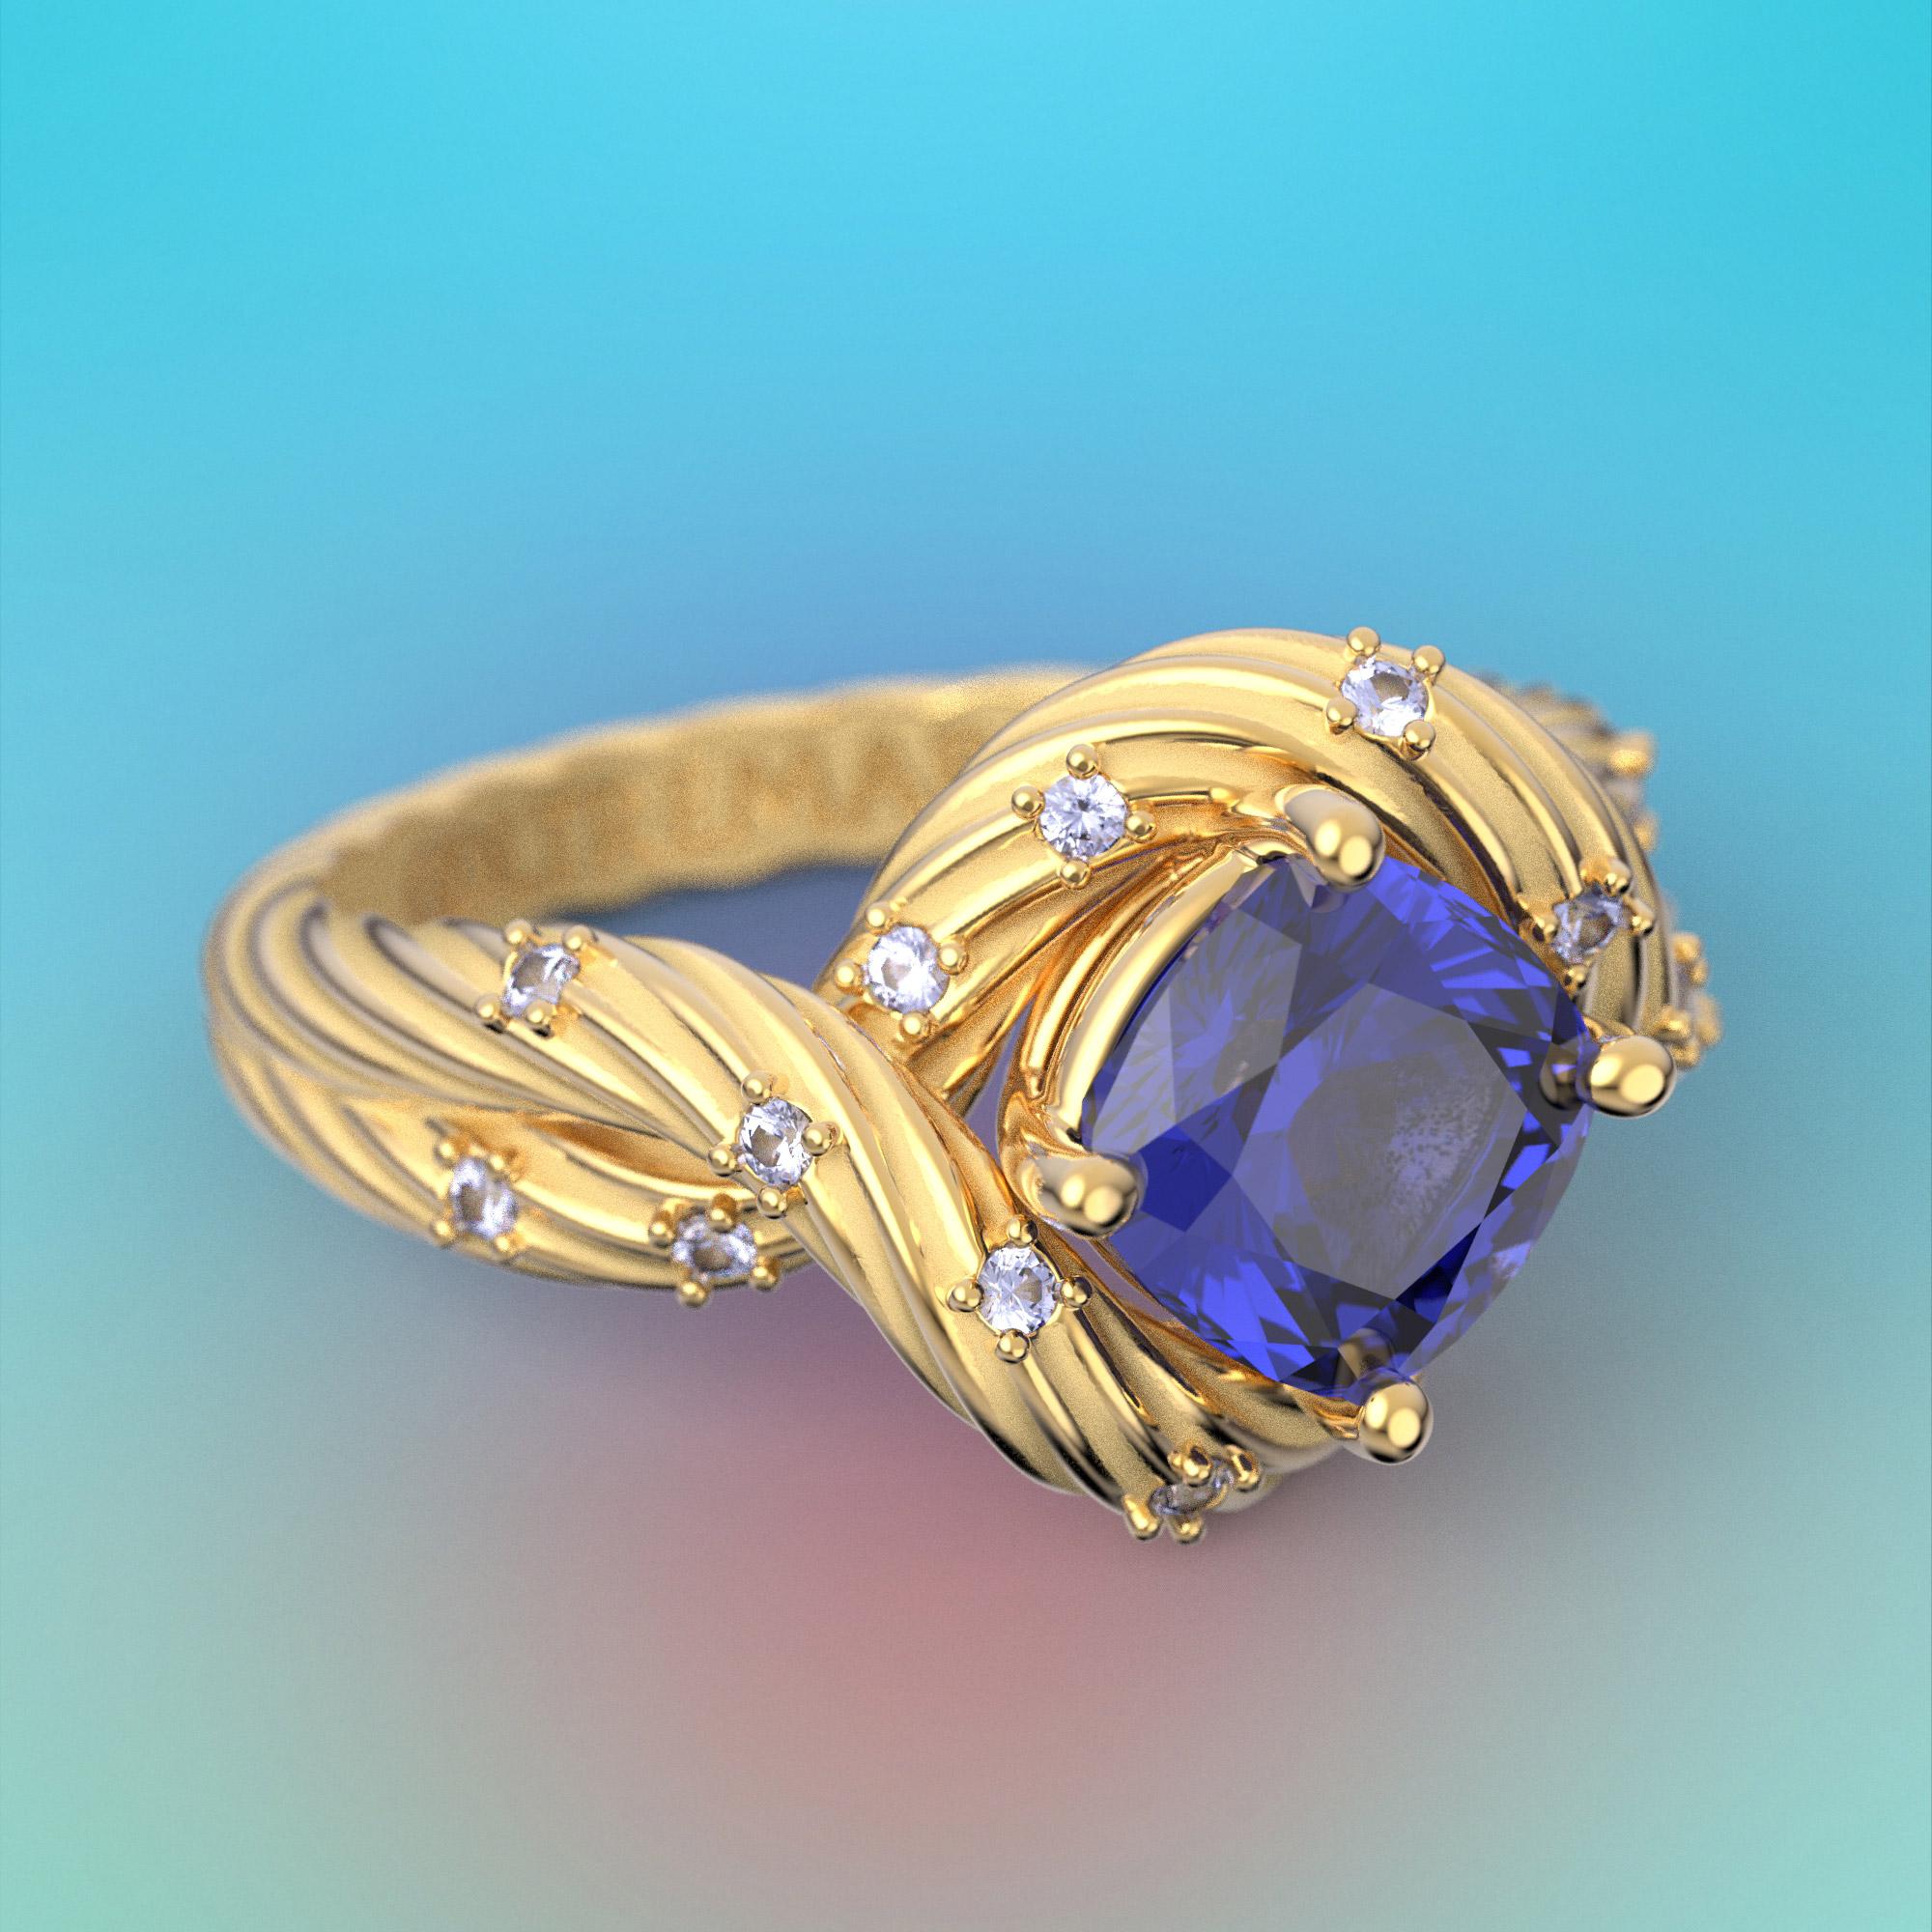 For Sale:  Tanzanite and Diamonds Ring 14k Solid Gold, Italian Fine Jewelry, made to order. 6